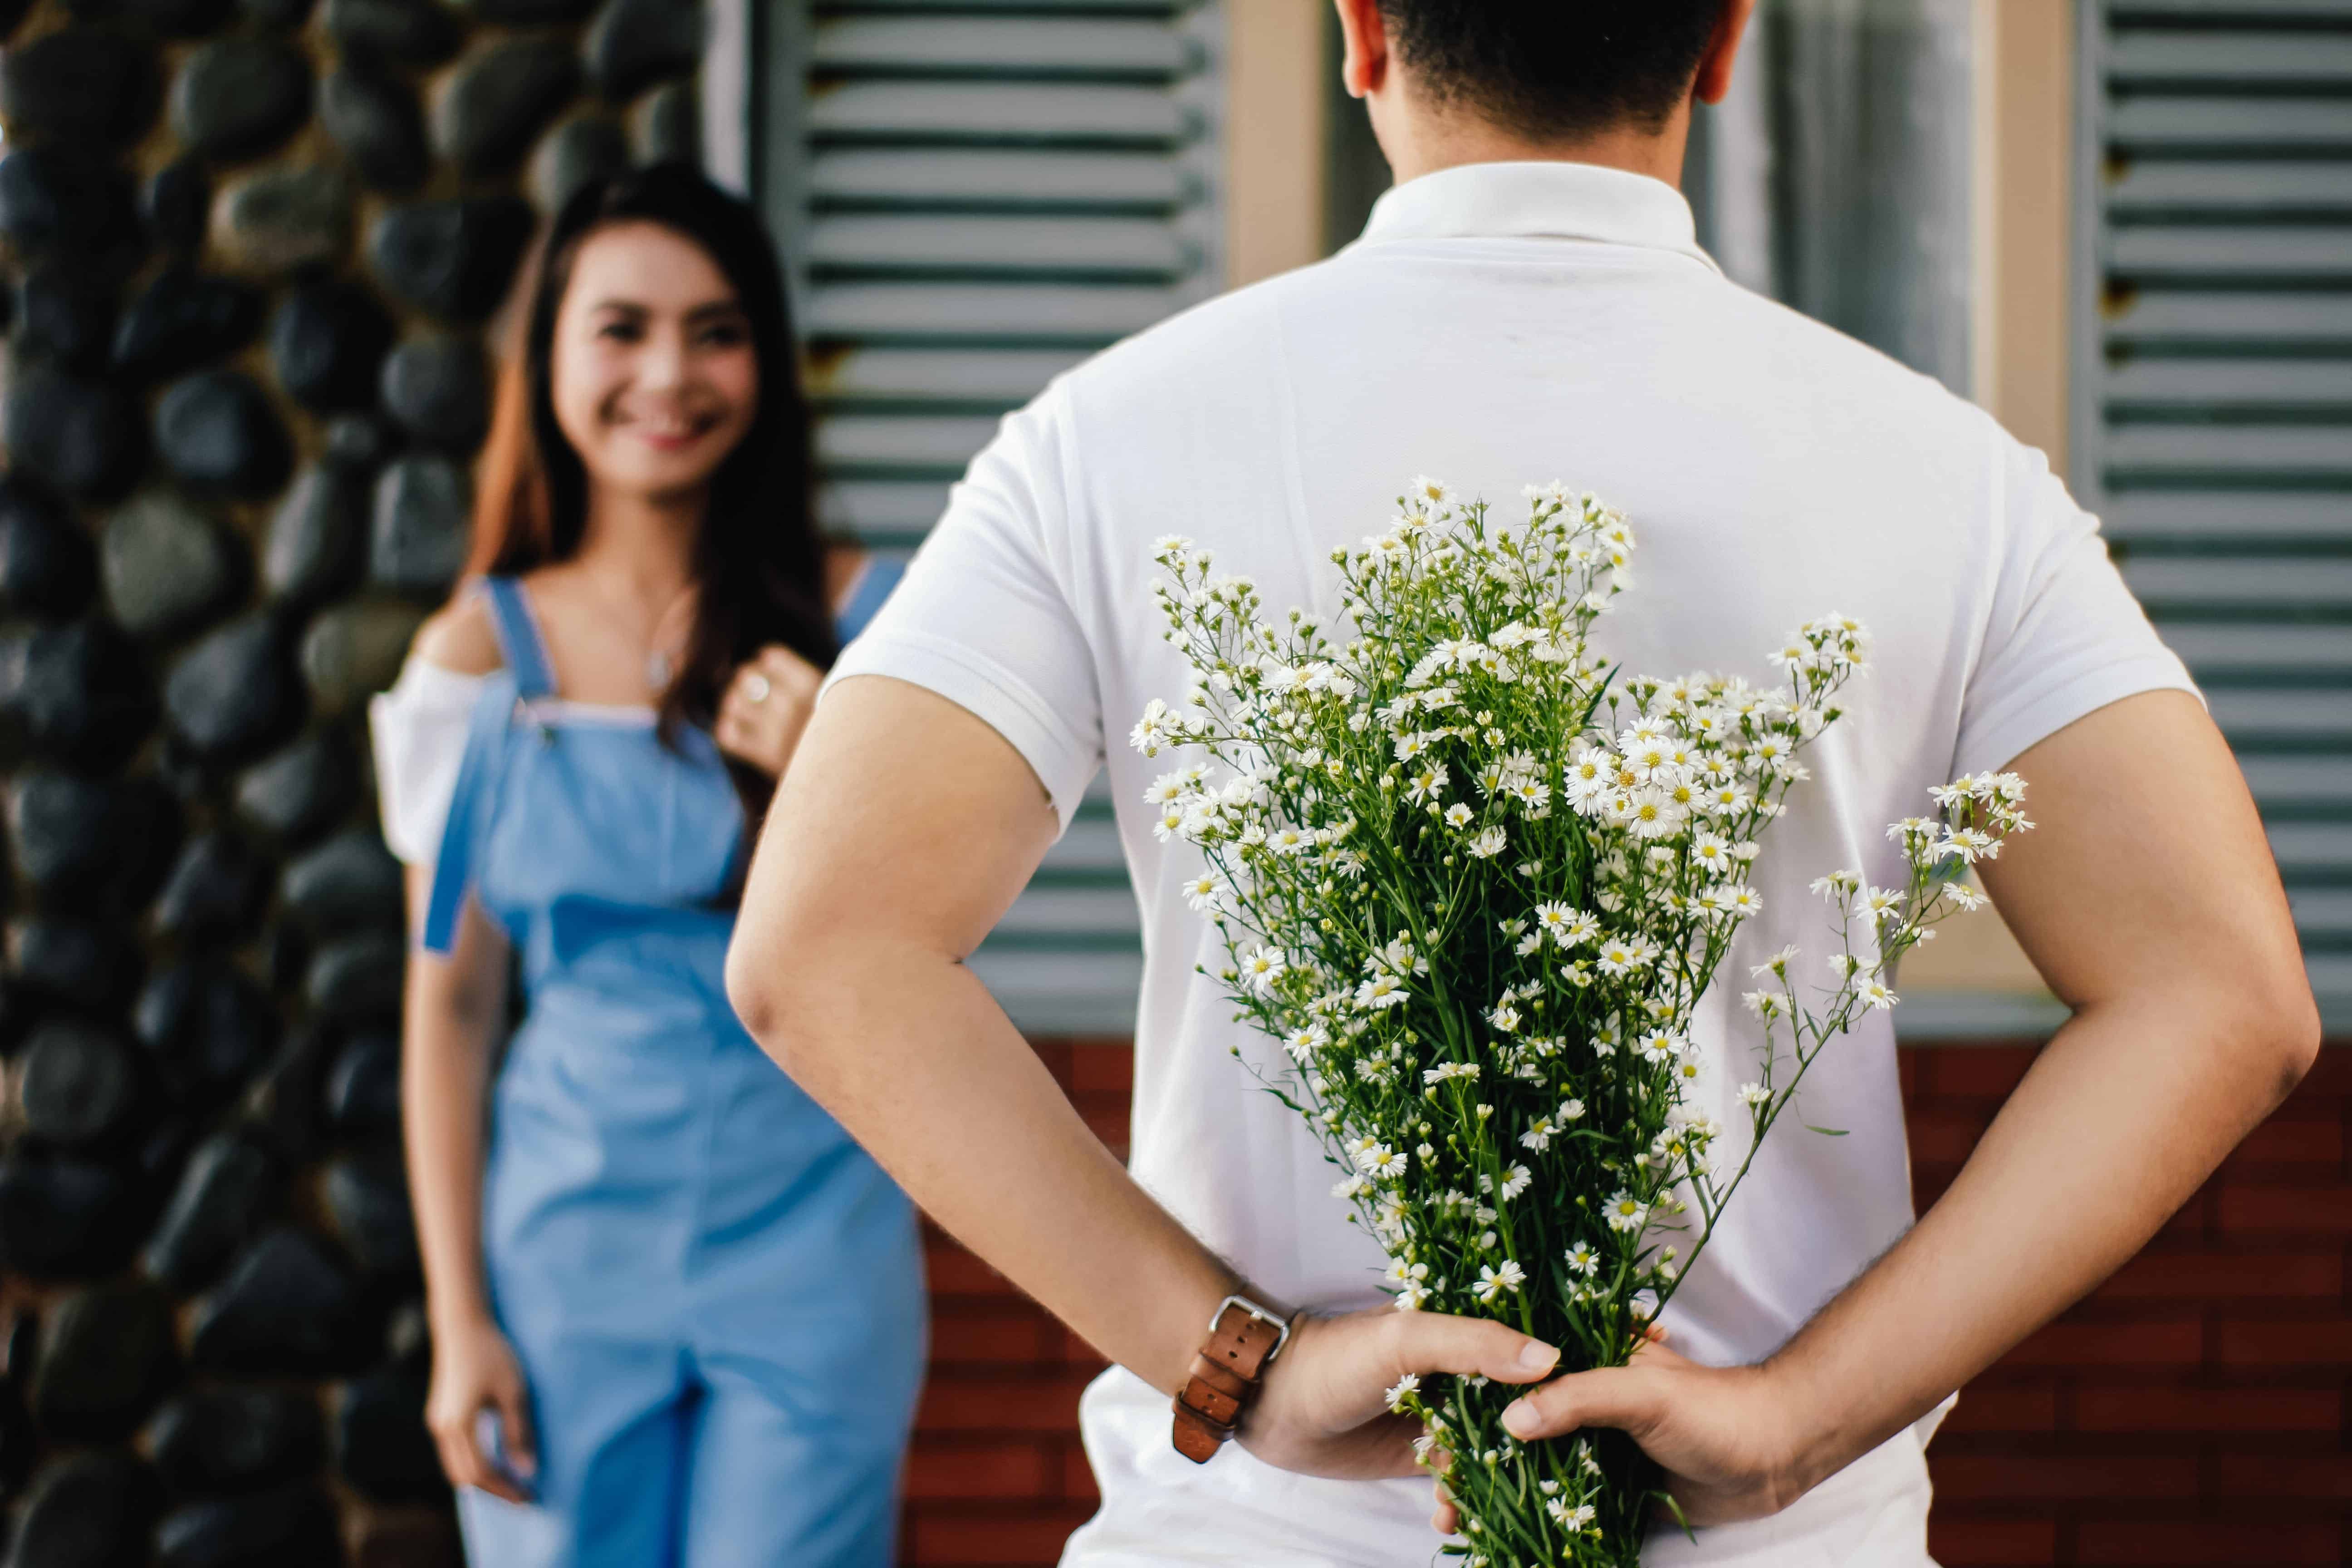 A man hides a bouquet of flowers from his girlfriend behind his back